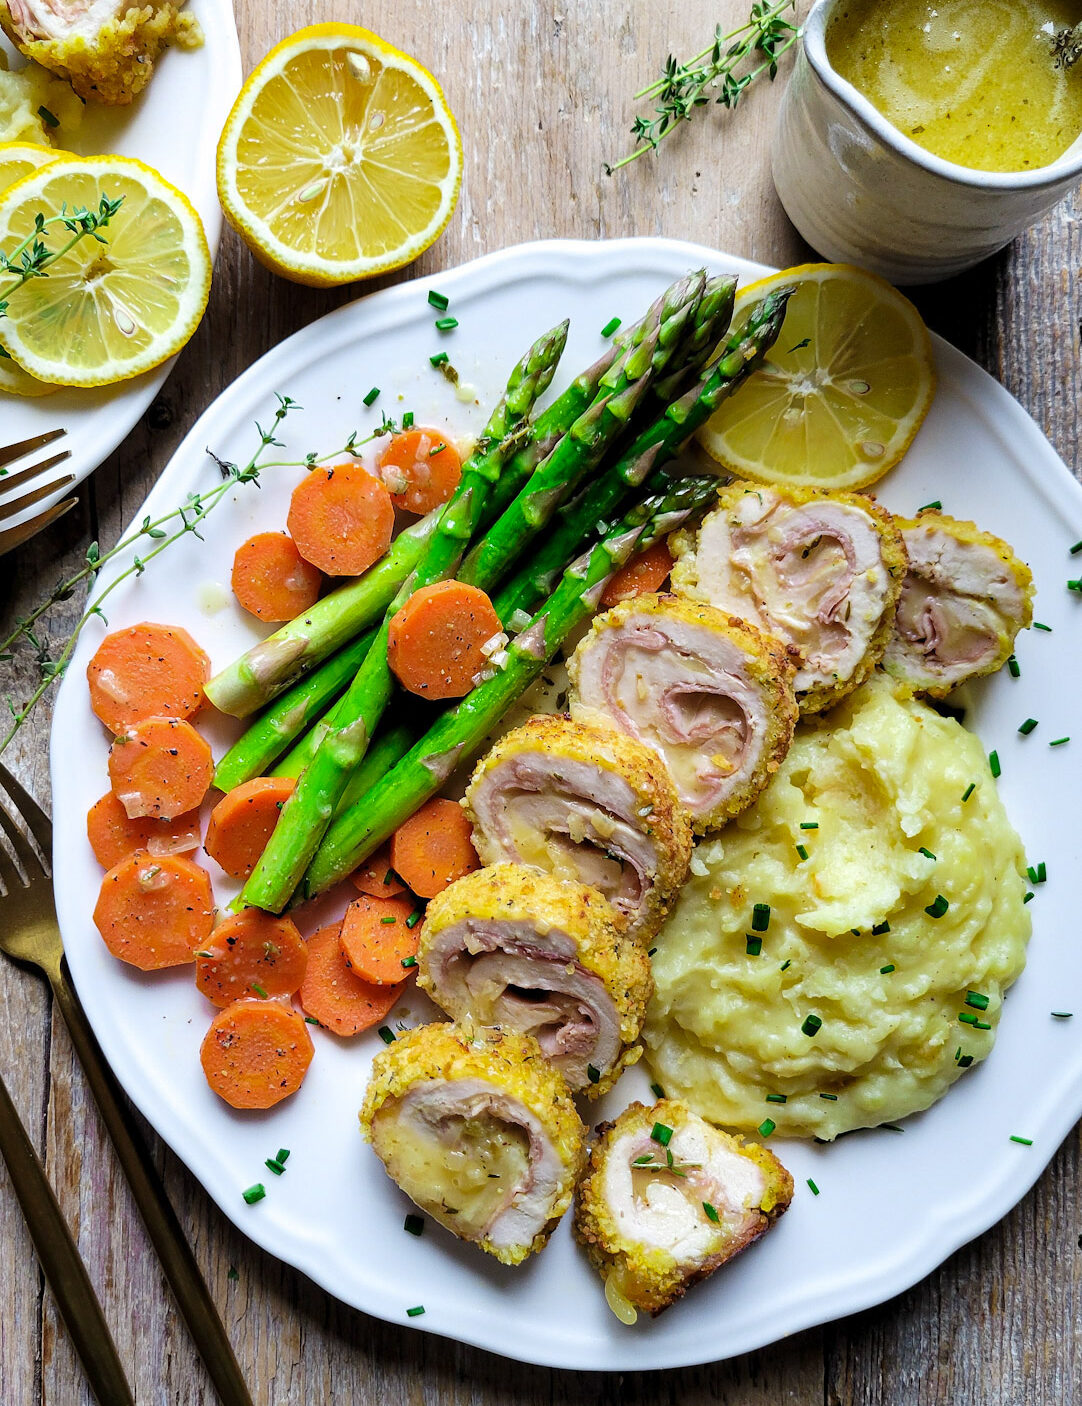 A plate set with Chicken Cordon Bleu, mashed potatoes, carrots and asparagus. Lemon Butter Sauce is to the side.